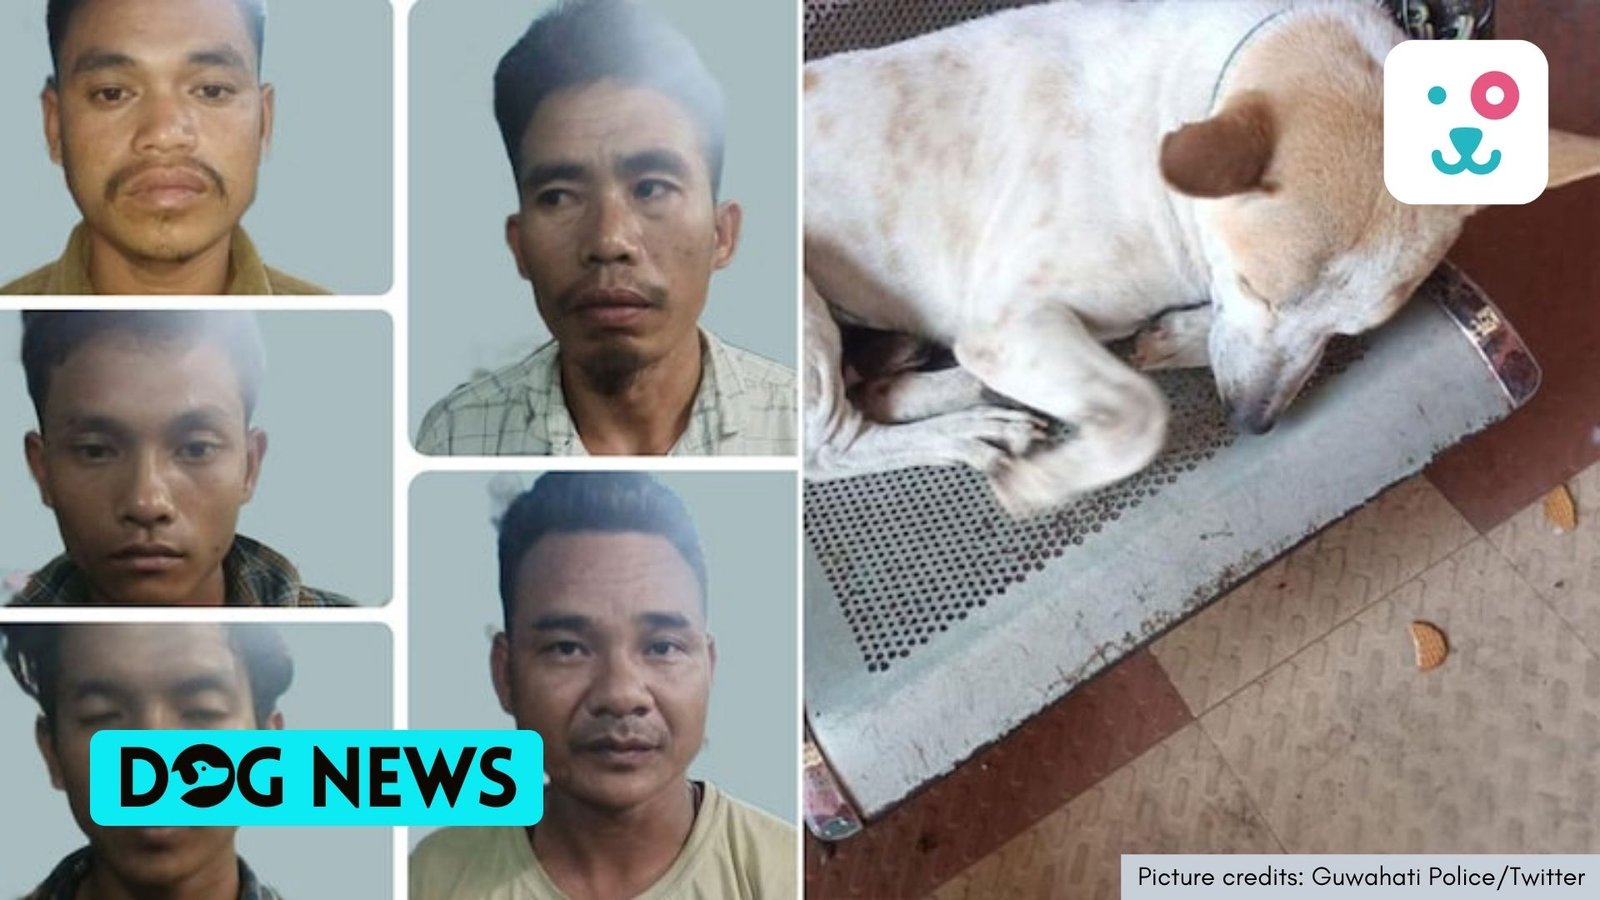 Guwahati Gang involved in dog smuggling busted; one dog rescued